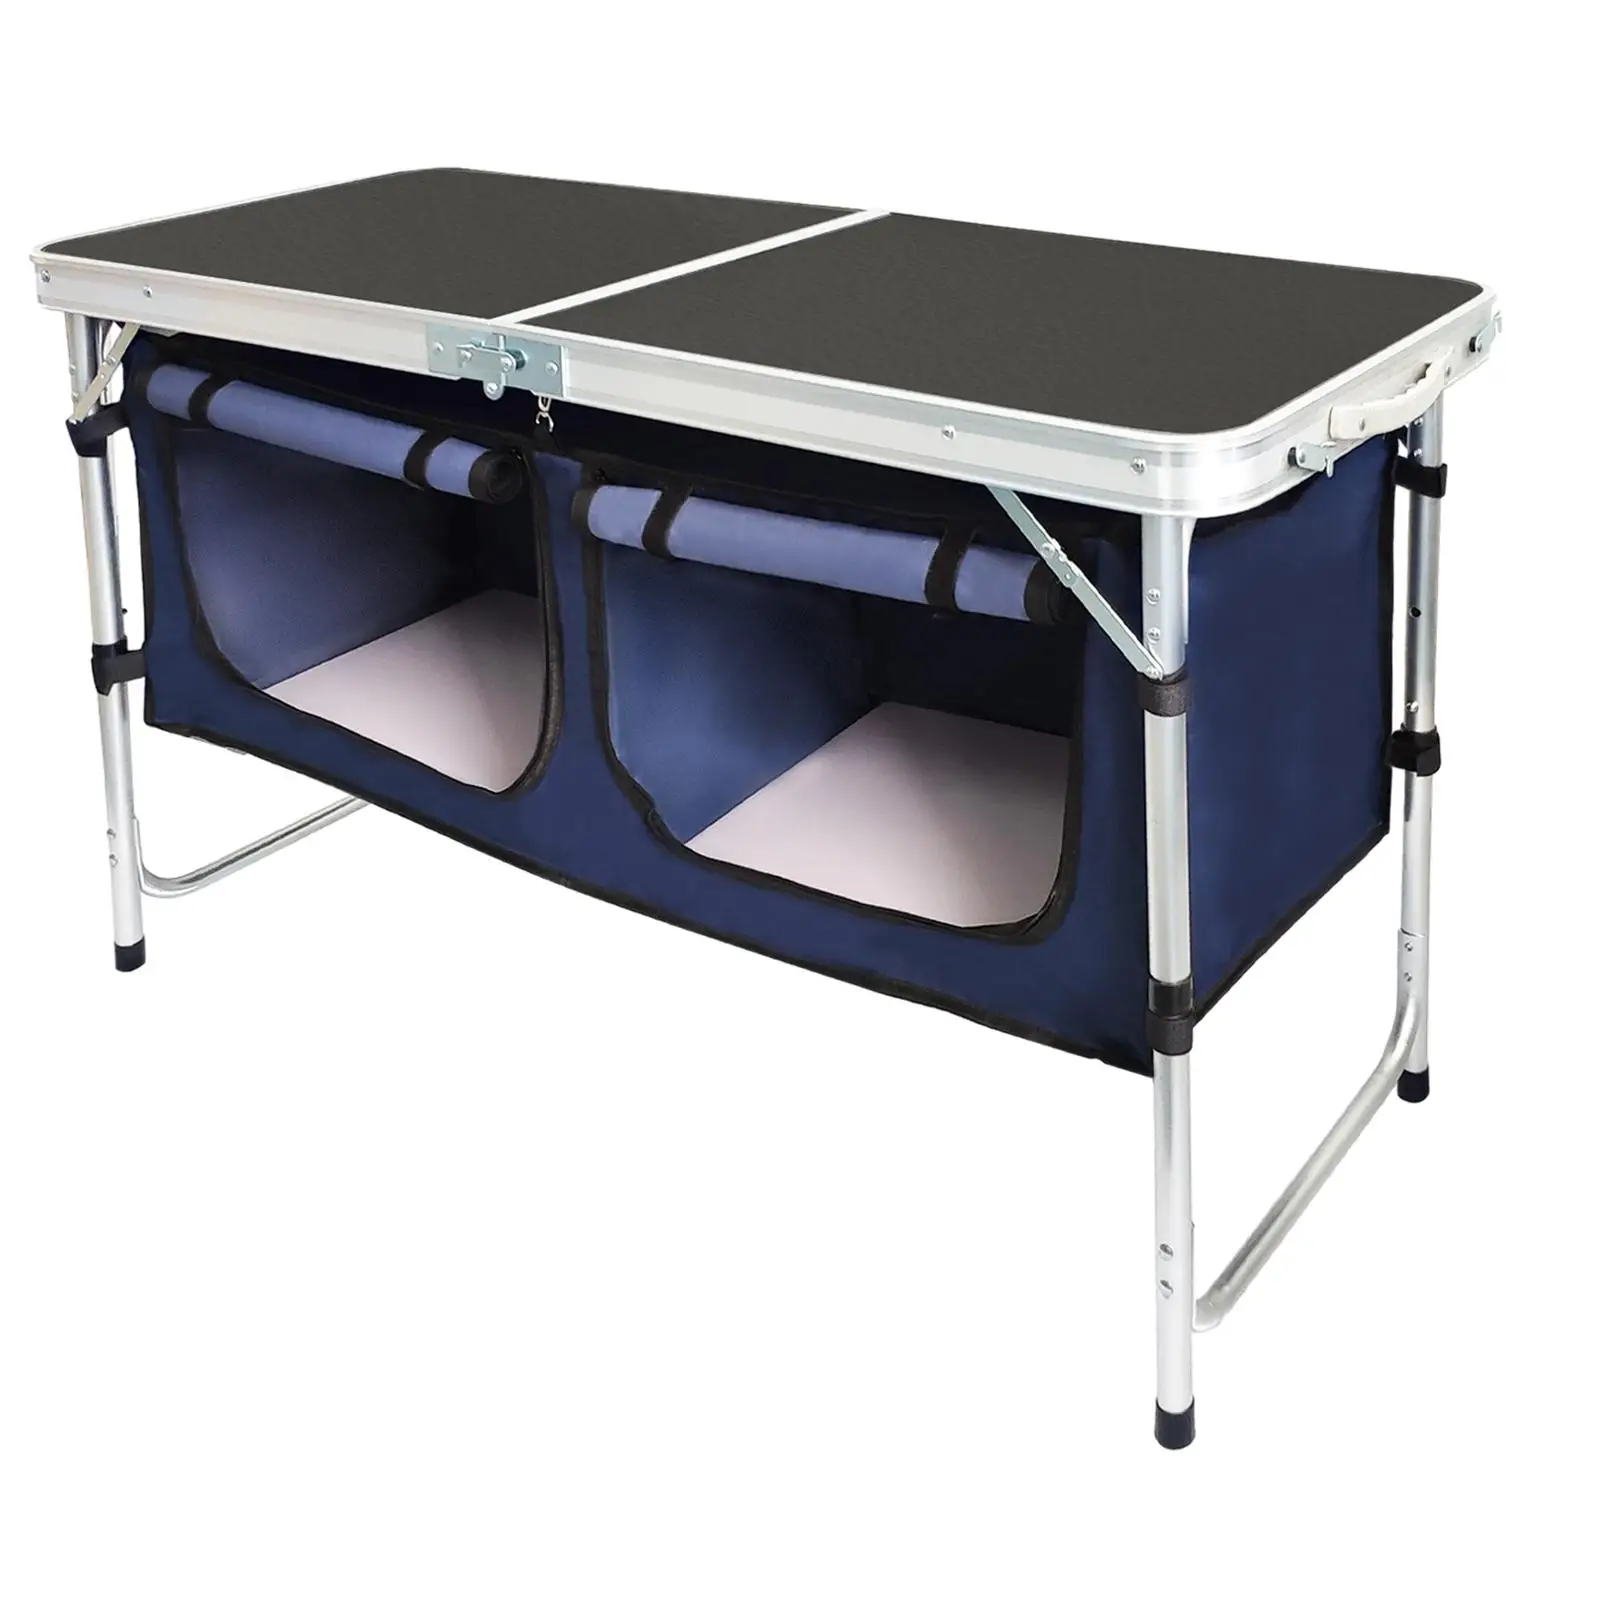 Folding Courtyard Table with Storage Compartment Camping Table Folding Table for BBQ Beach Indoor Outdoor Picnic Travel